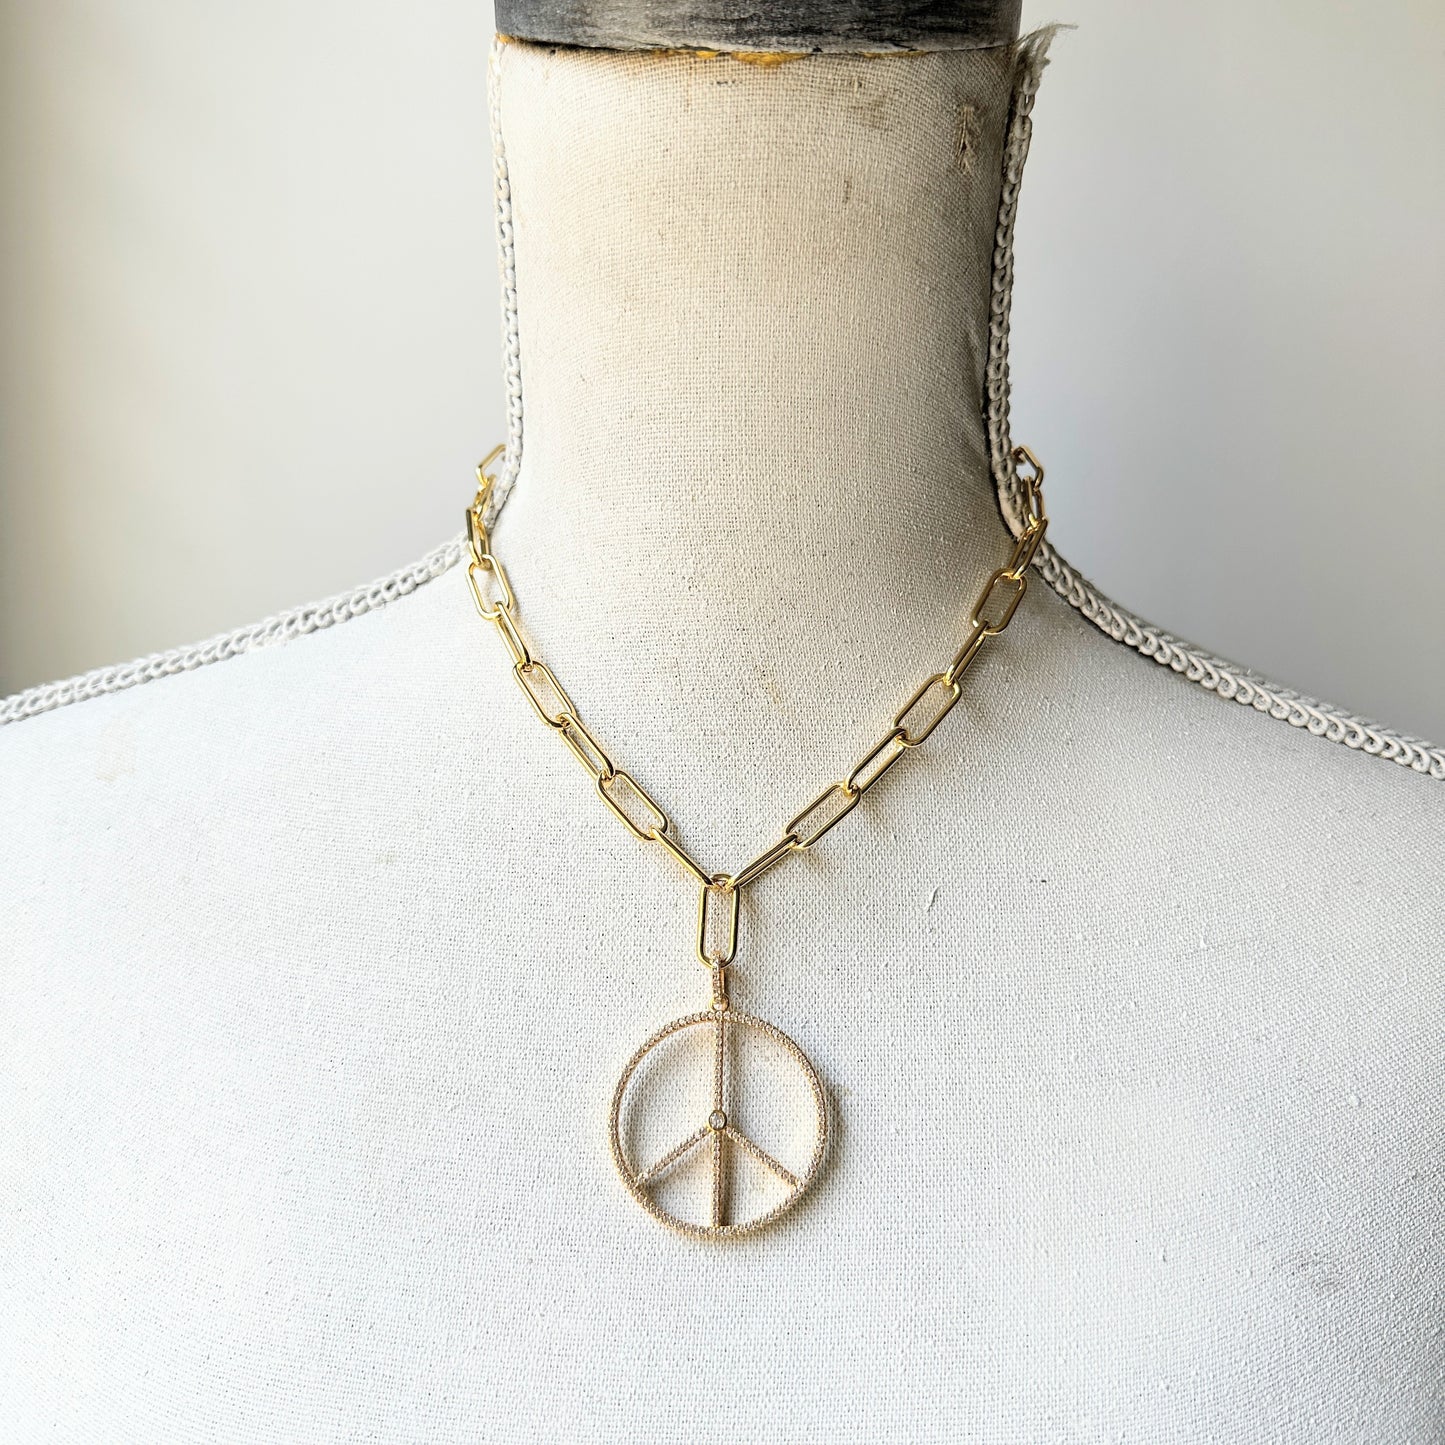 Oversized Peace sign statement necklace